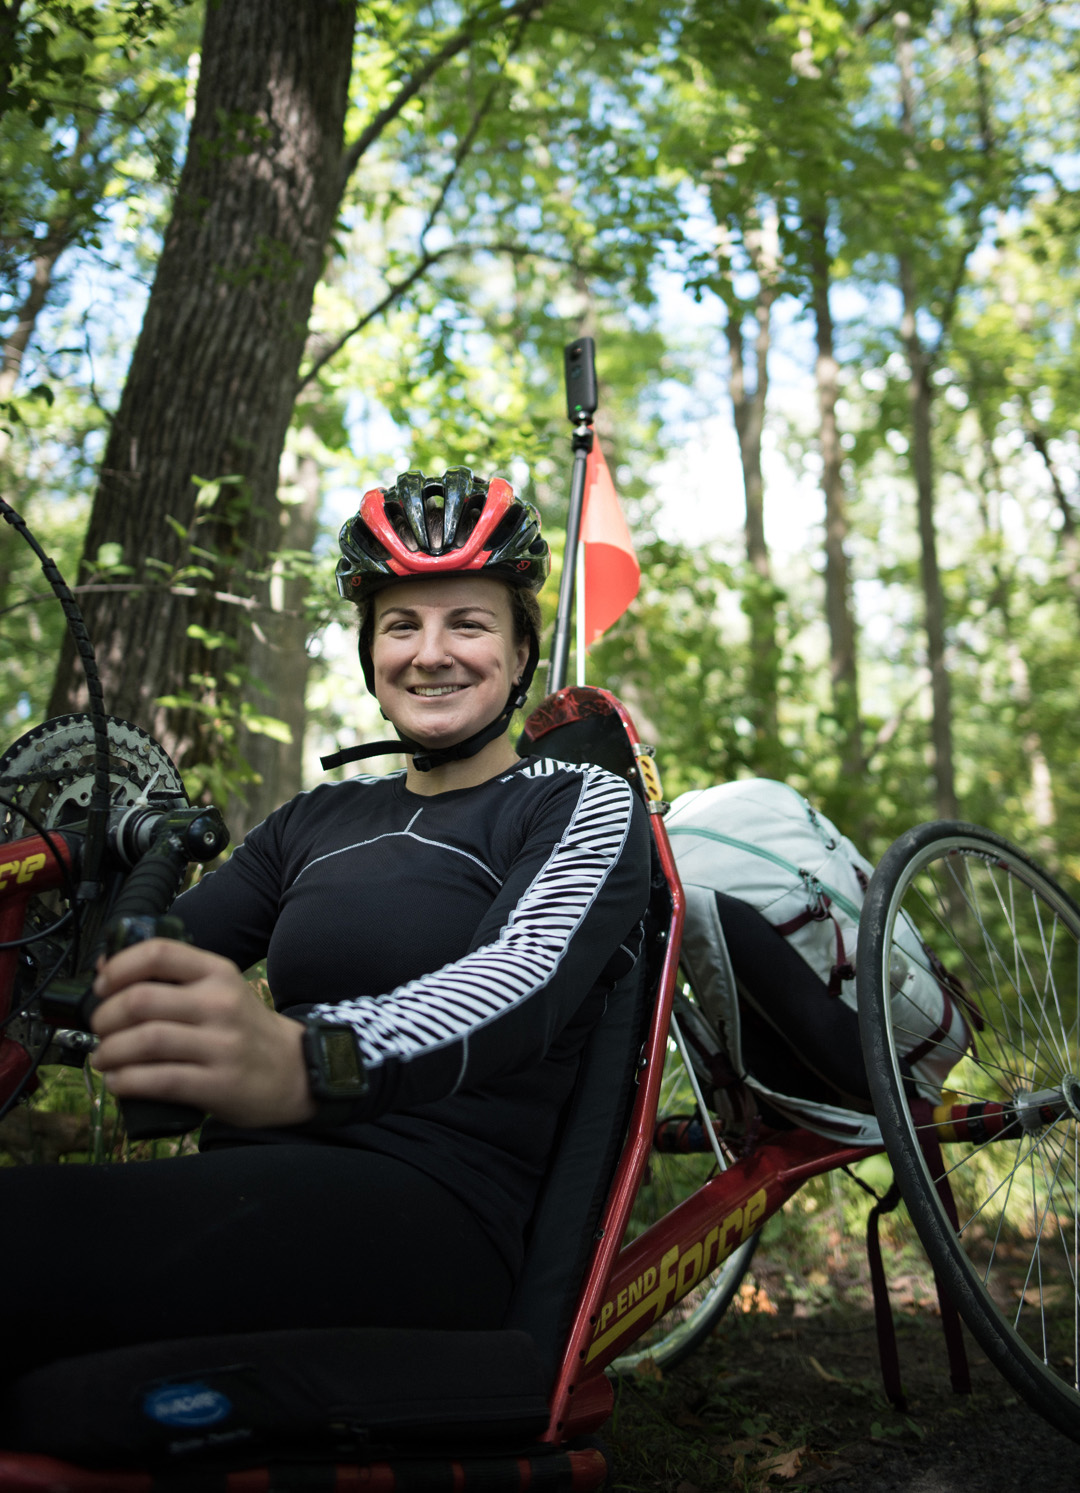 camille is smiling as she sits in her hand cycle in a wooded area 